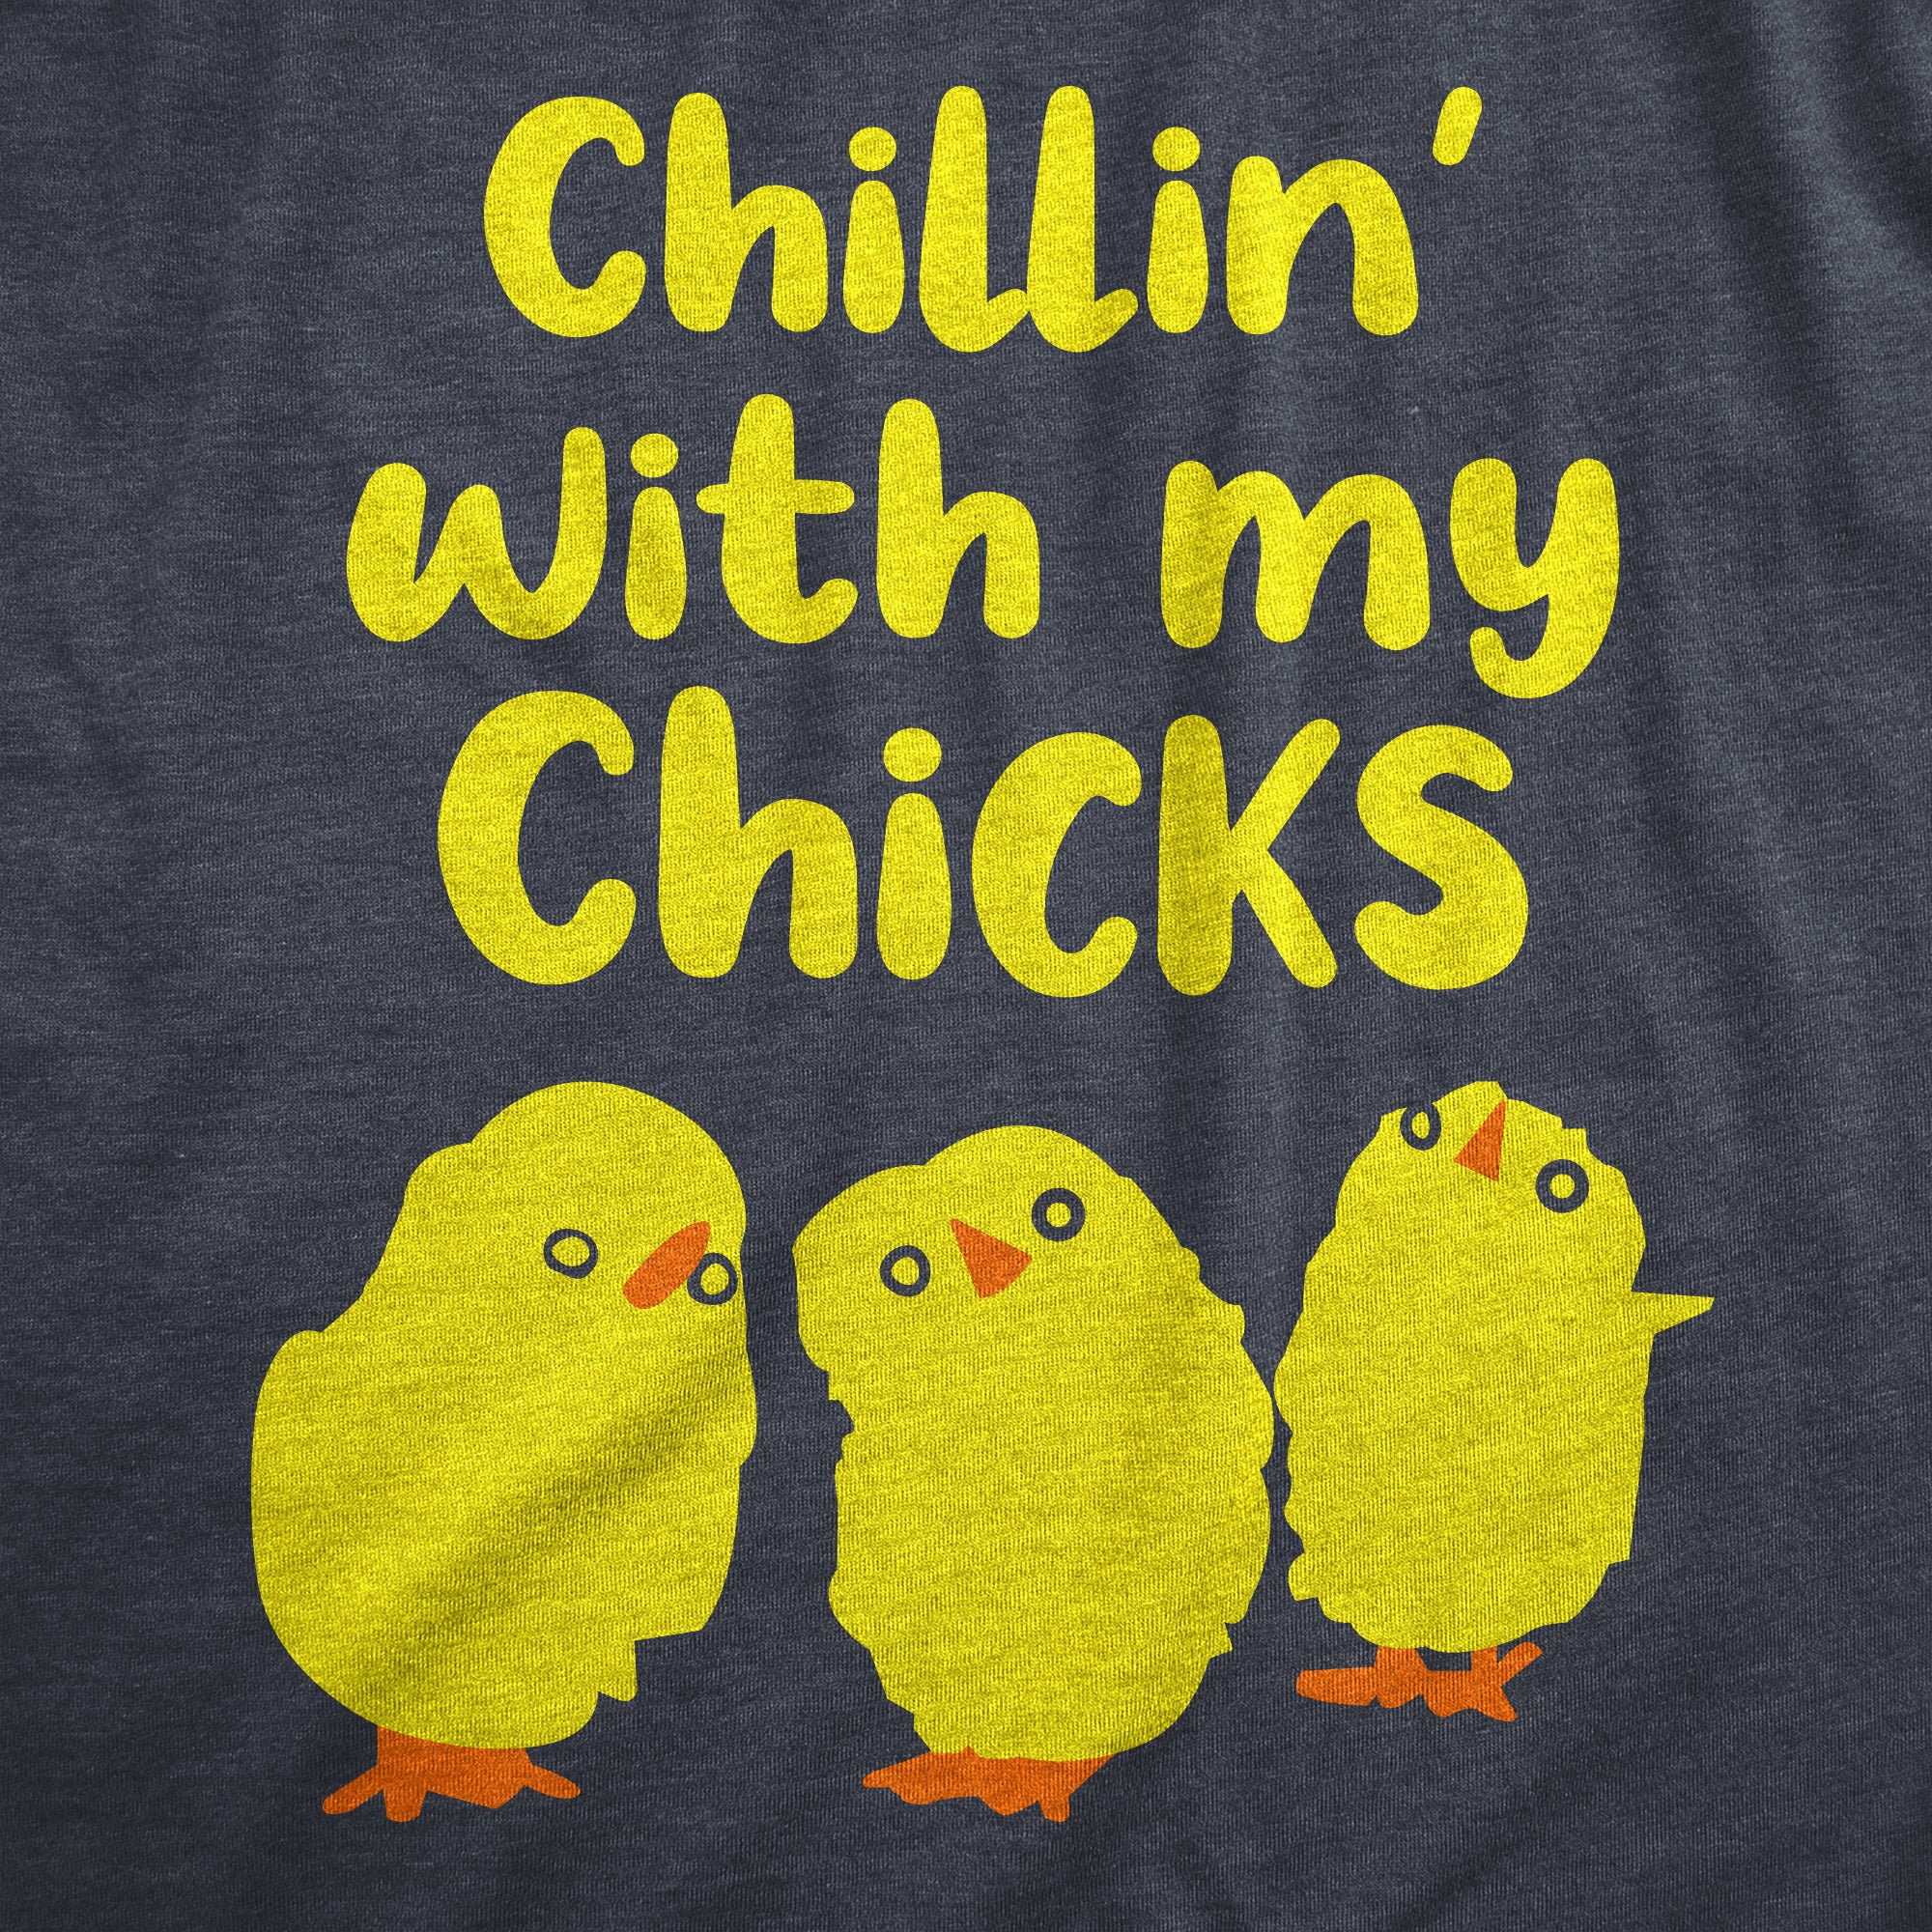 Funny Heather Navy - CHICKS Chillin With My Chicks Womens T Shirt Nerdy animal sarcastic Tee